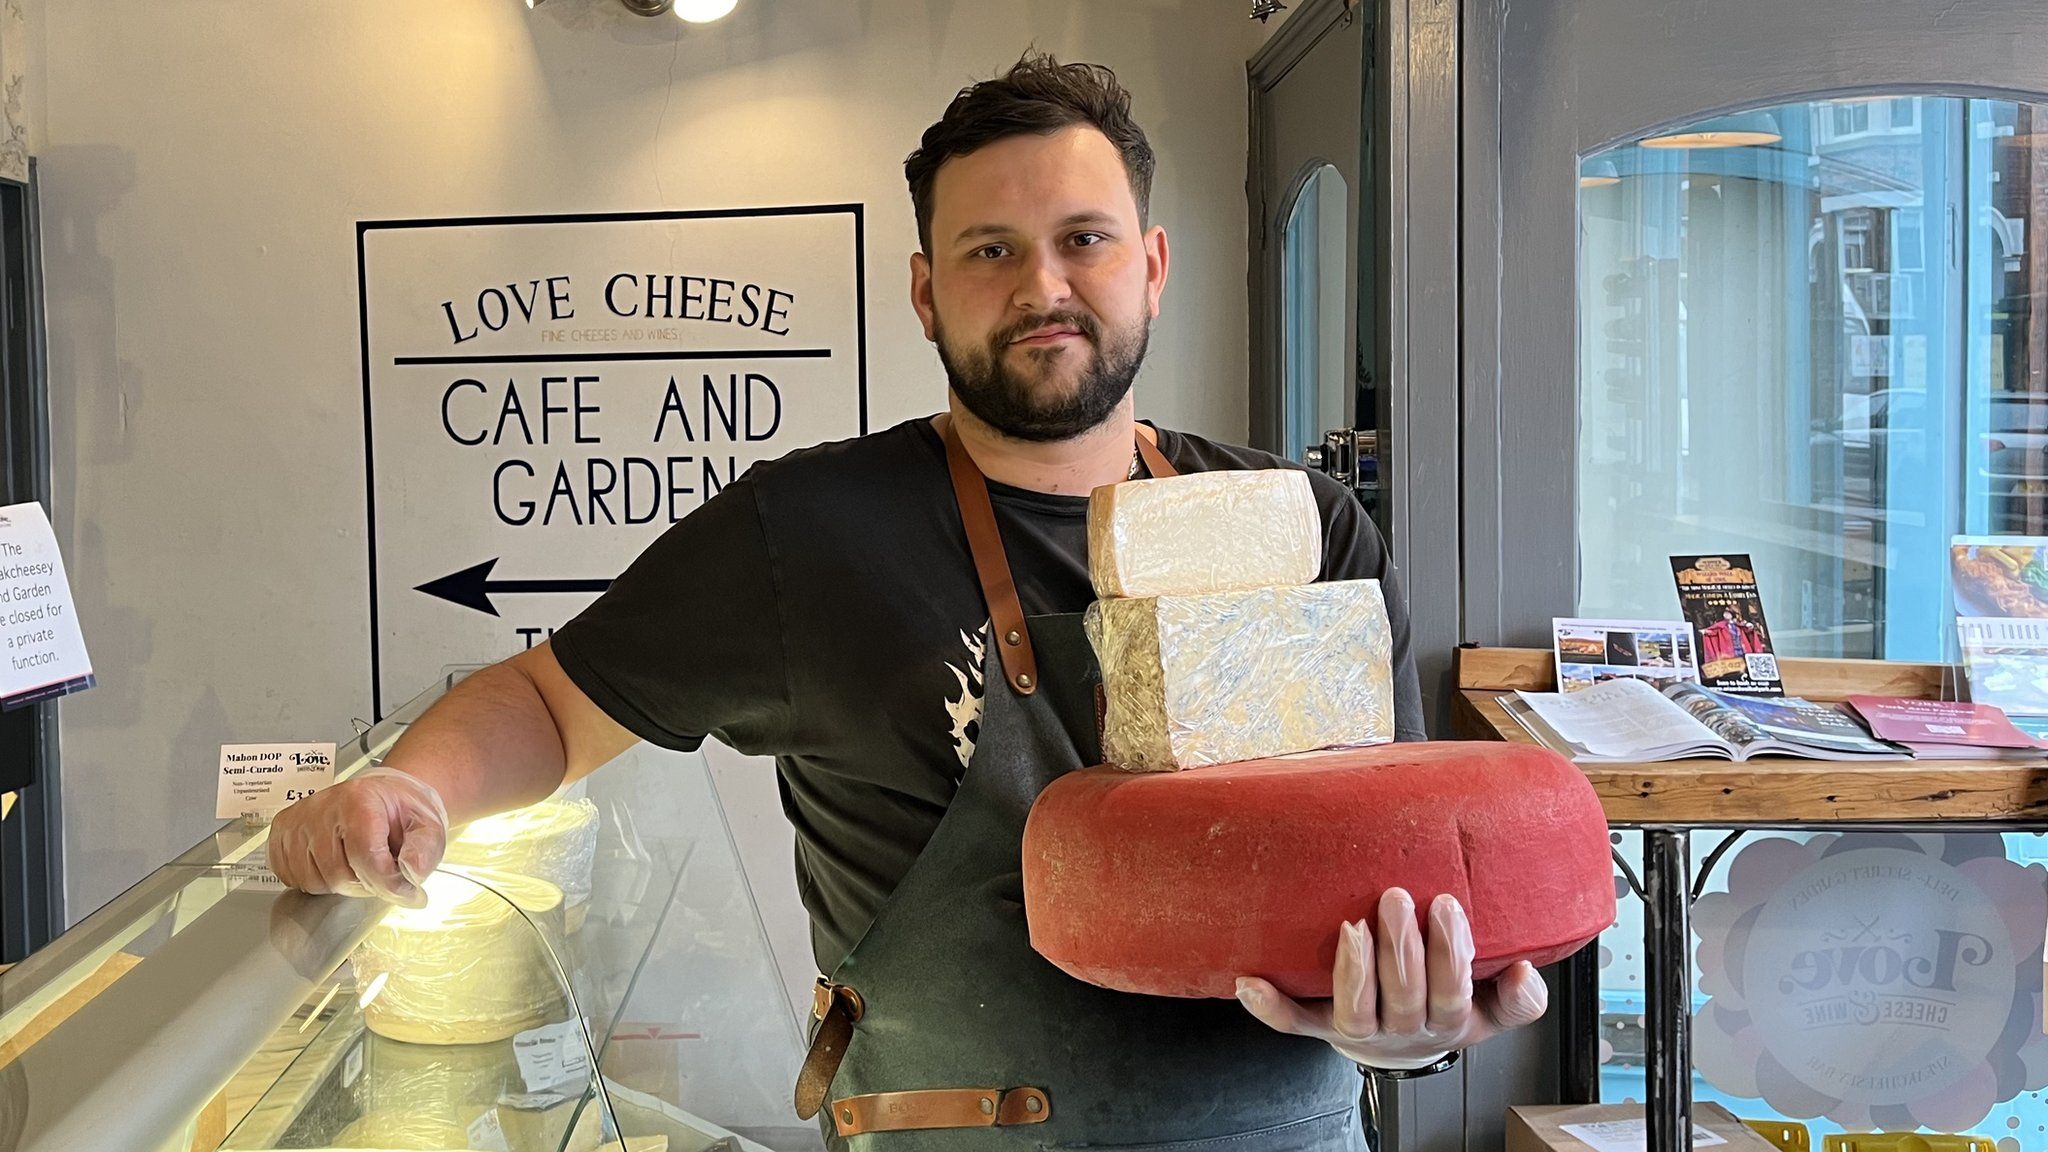 Man in shop holding cheese